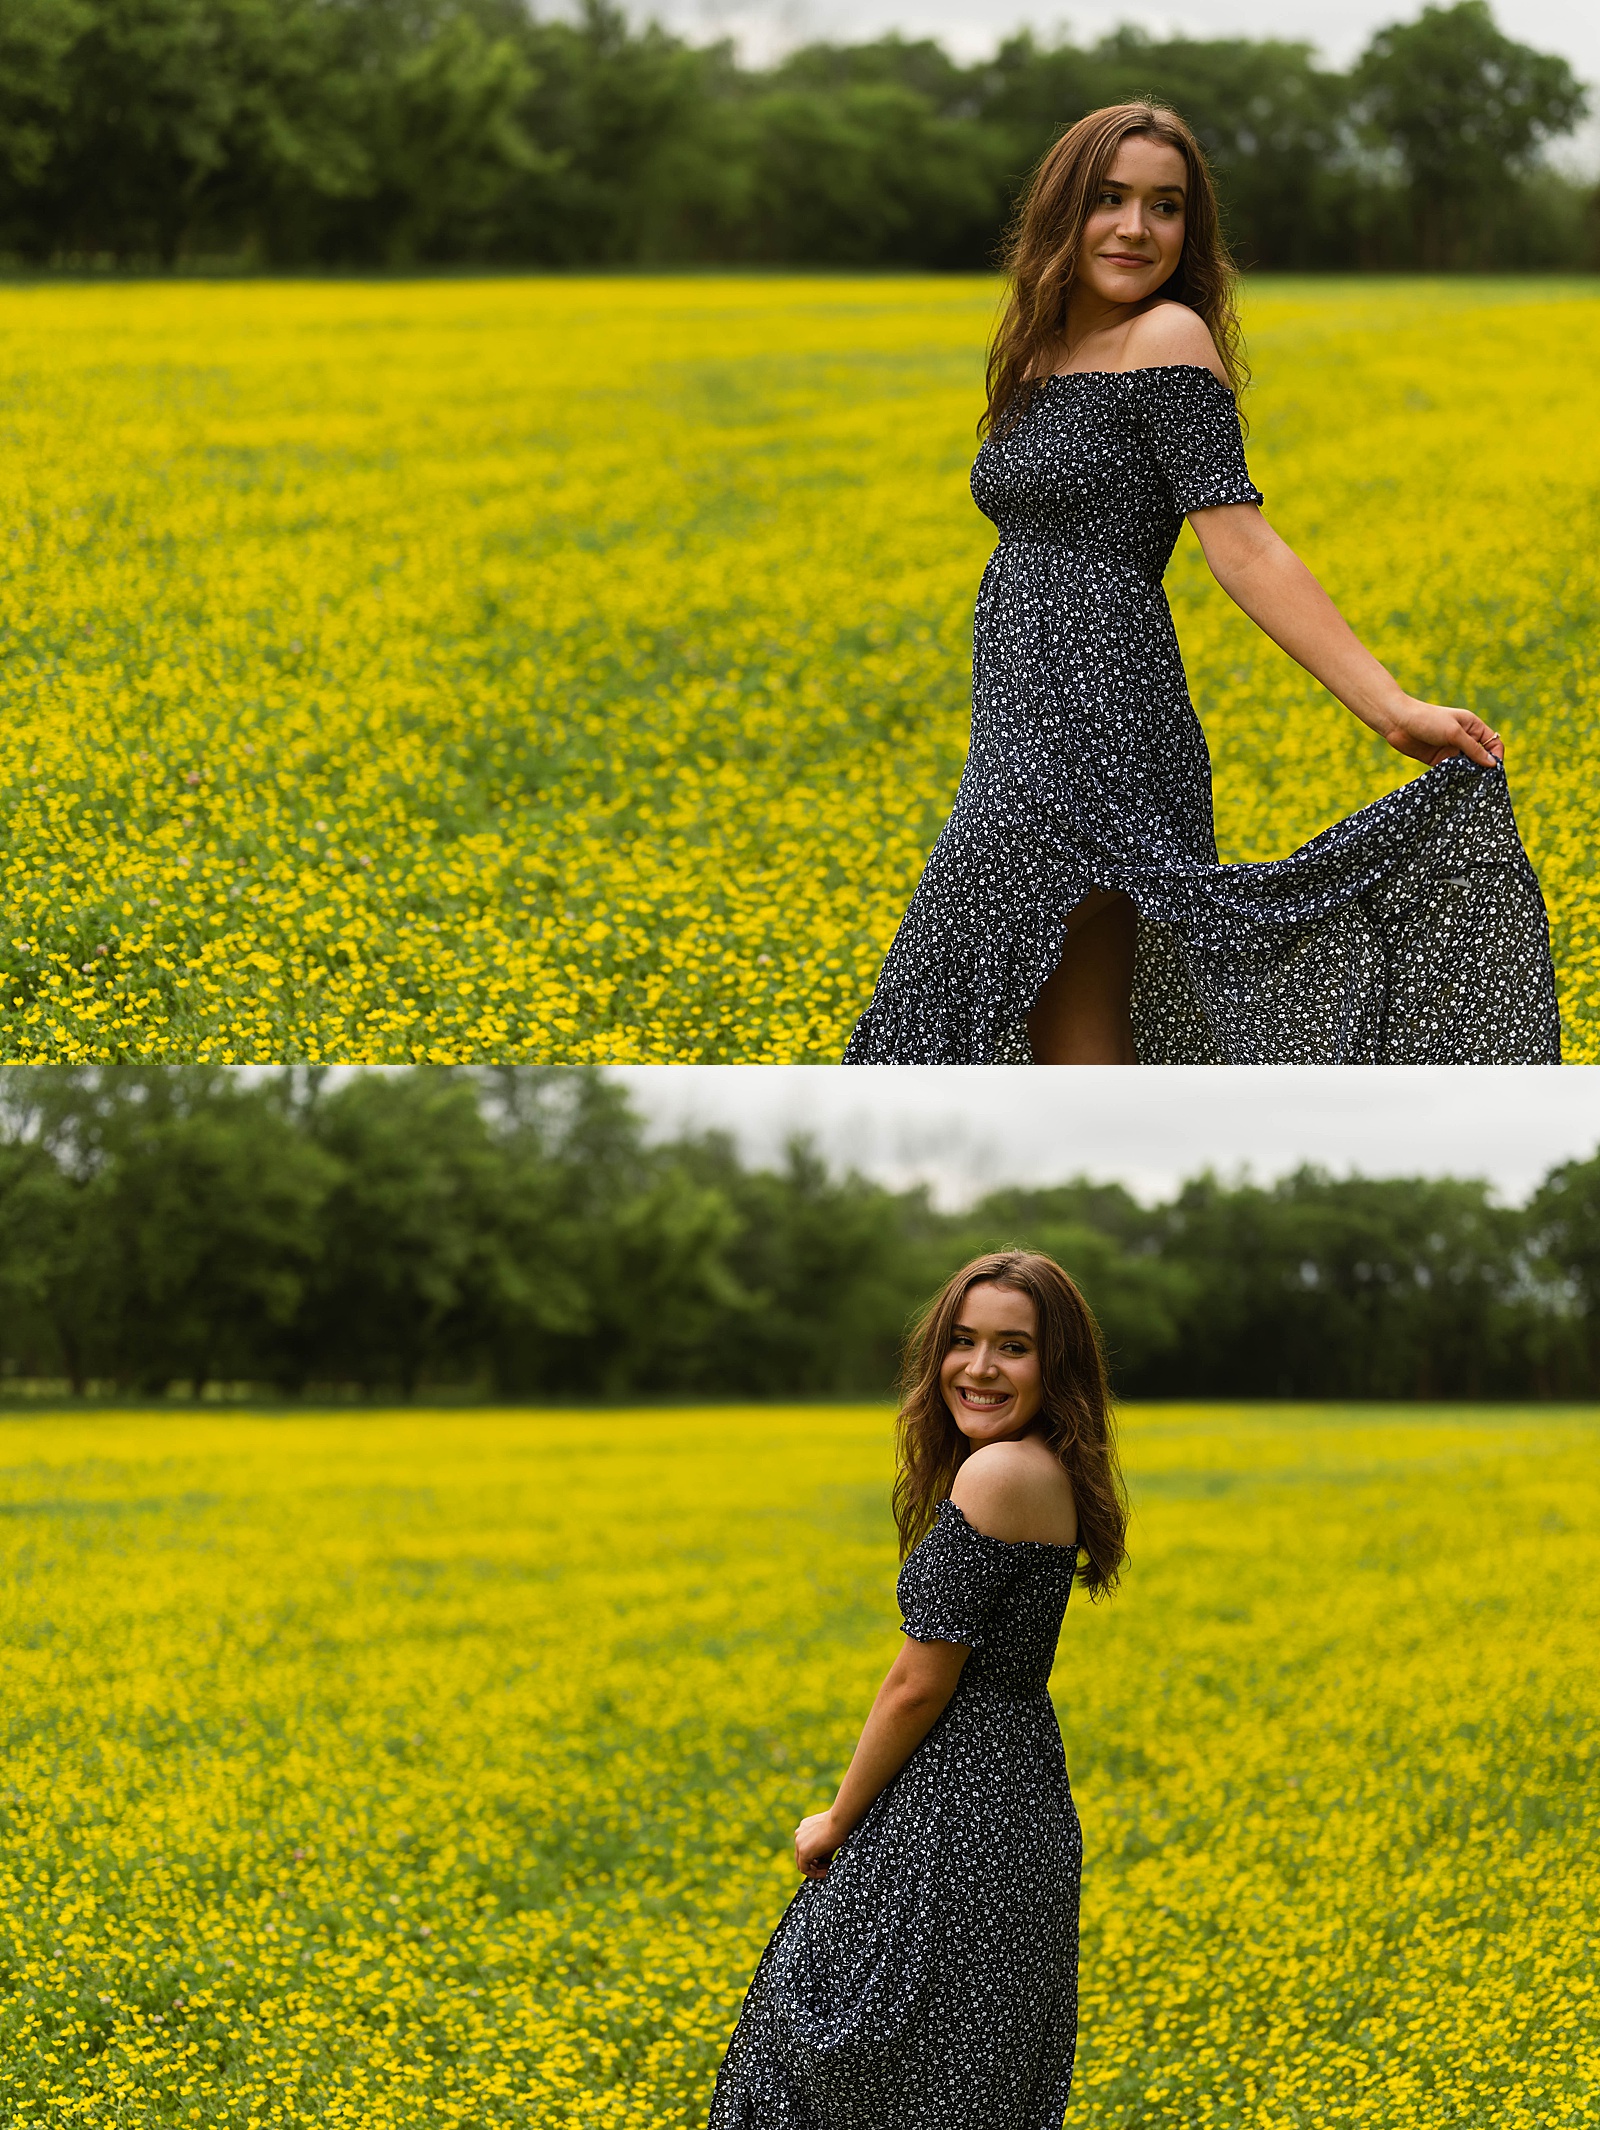 Brunette woman dancing in yellow blossoms for Spring Flowers portraits